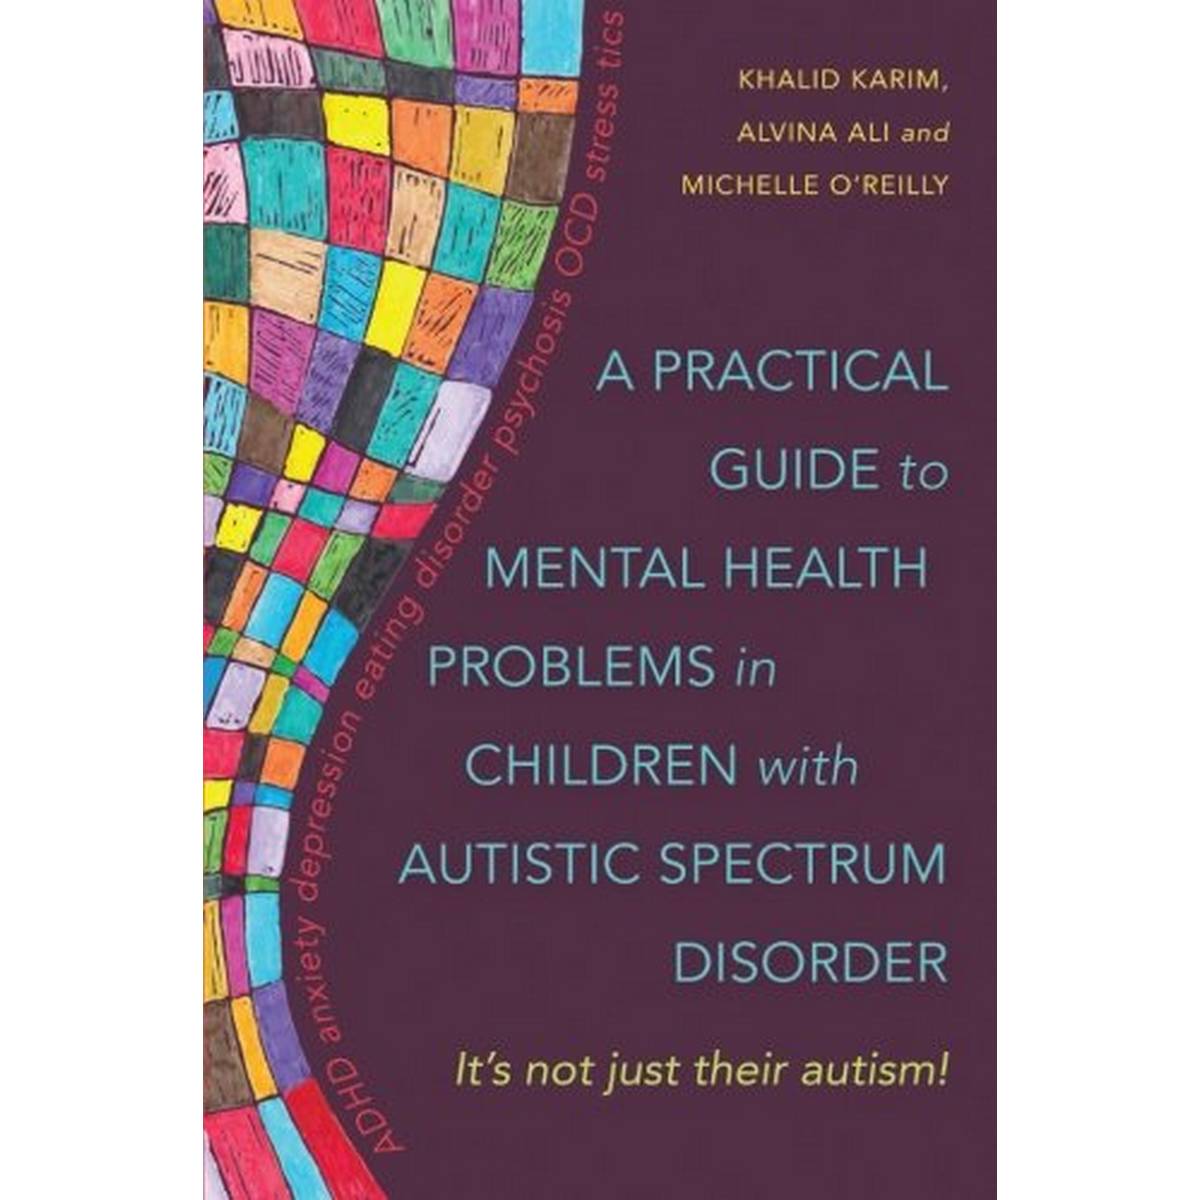 A Practical Guide to Mental Health Problems in Children with Autistic Spectrum